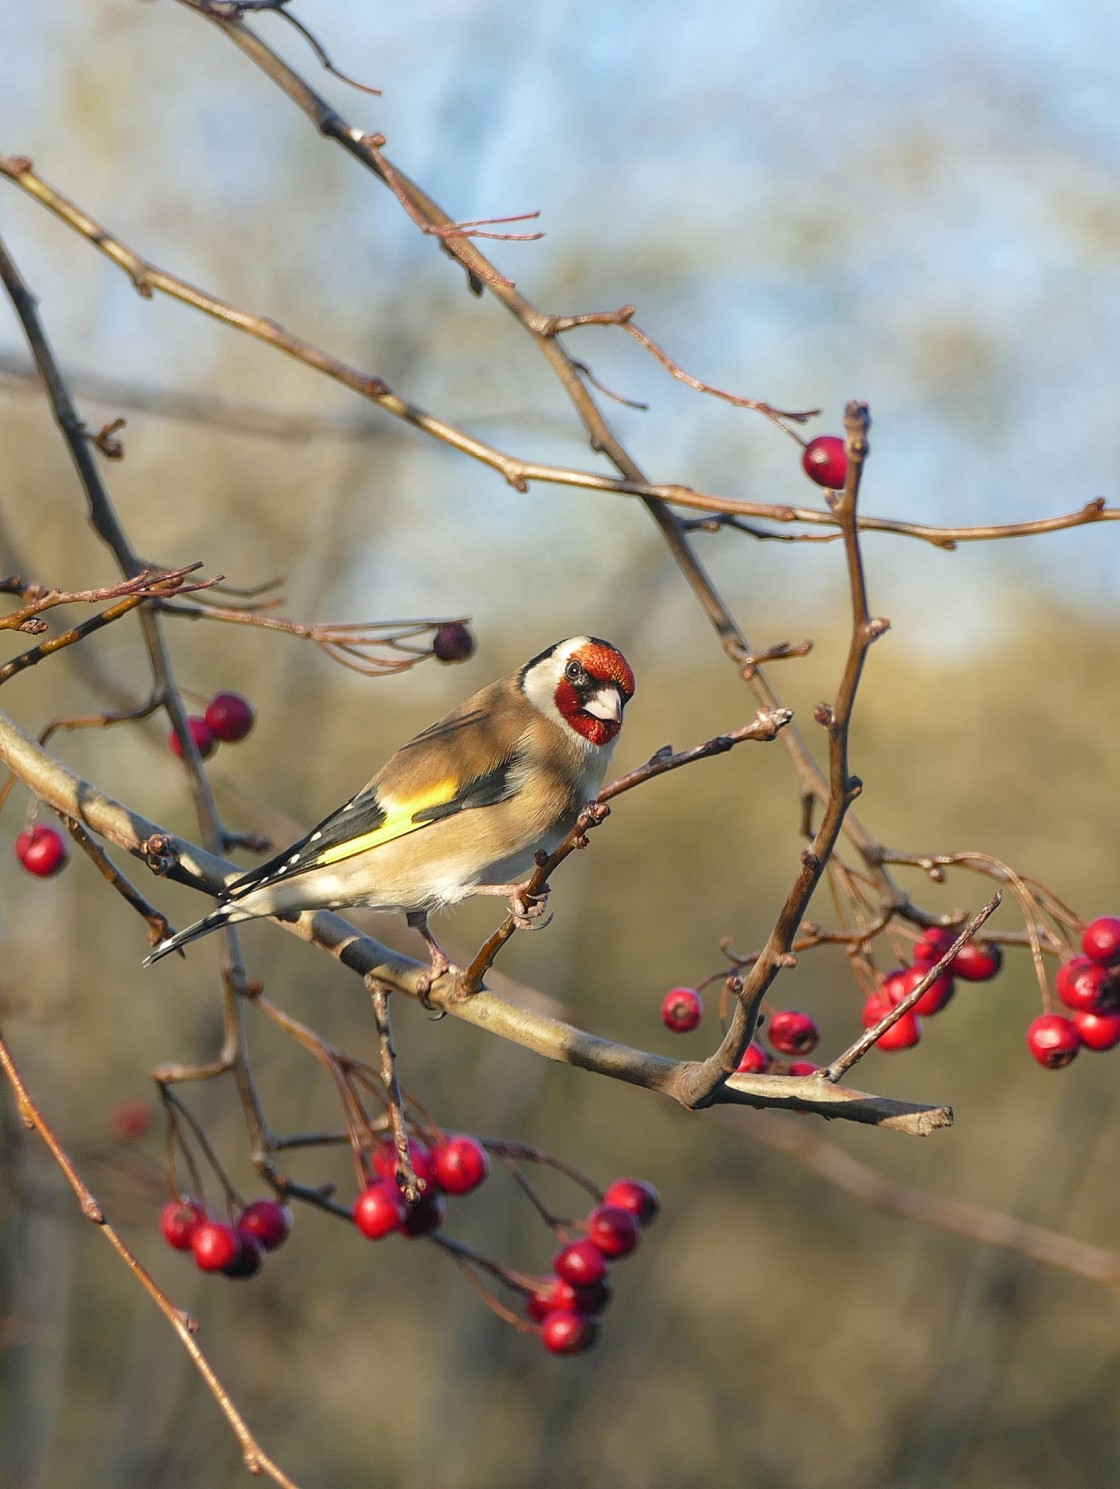 "Goldfinch amongst berries" stock image